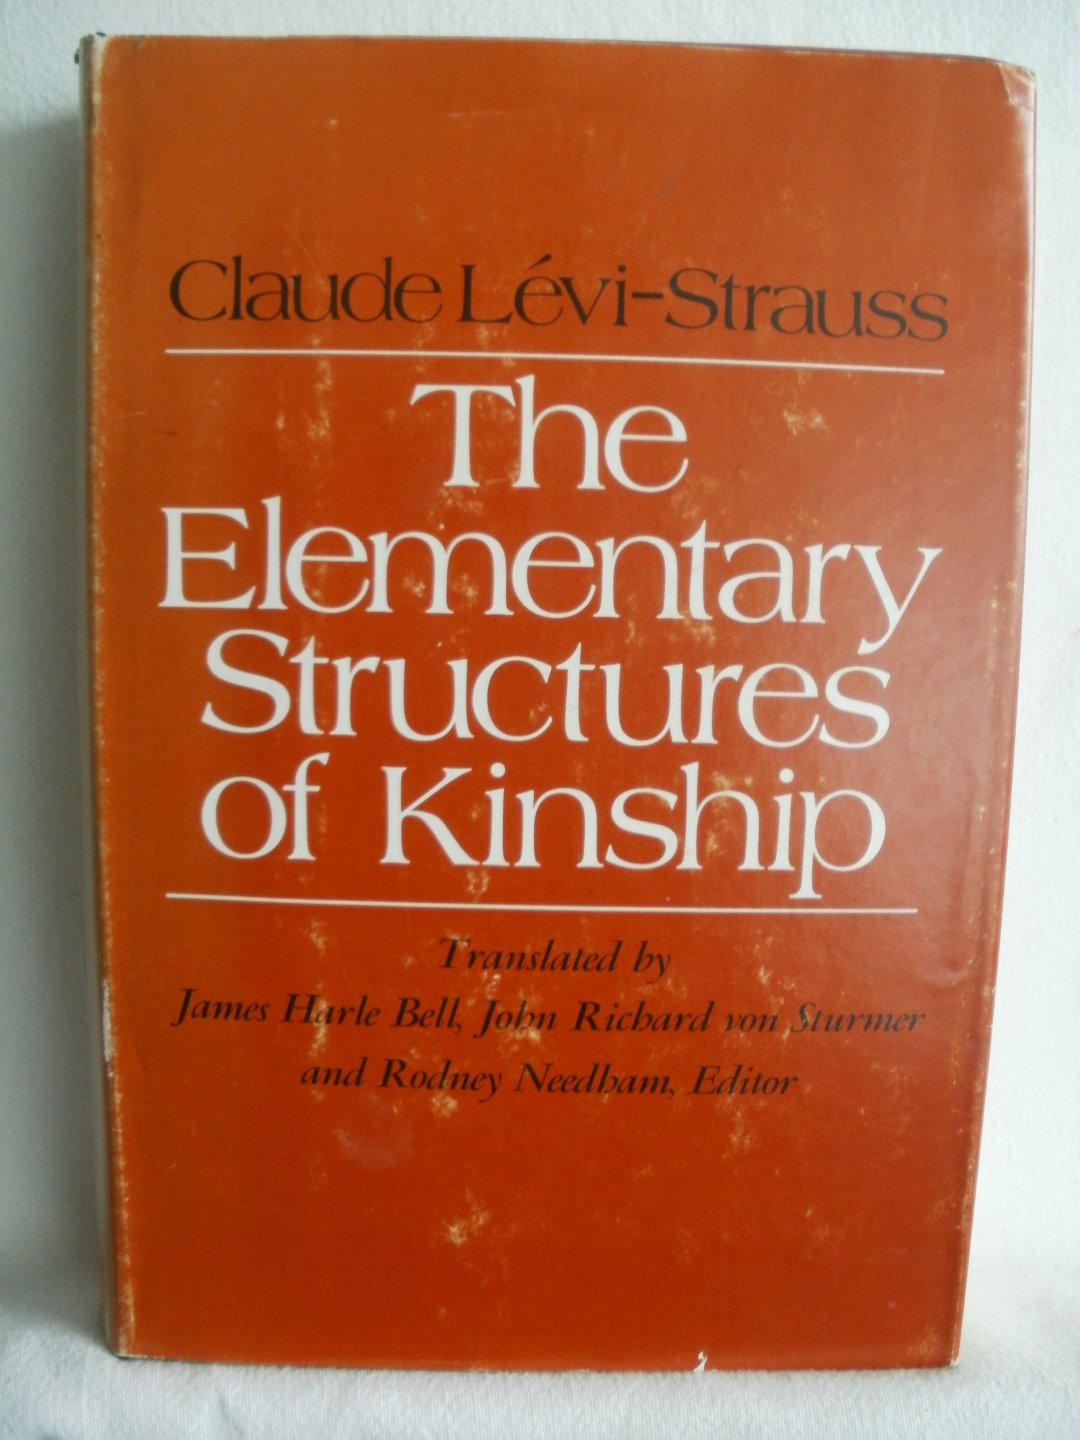 Levi-Strauss, Claude; Bell, James Harle and Needham, Rodney (translators from French) - The Elementary Structures of Kinship.